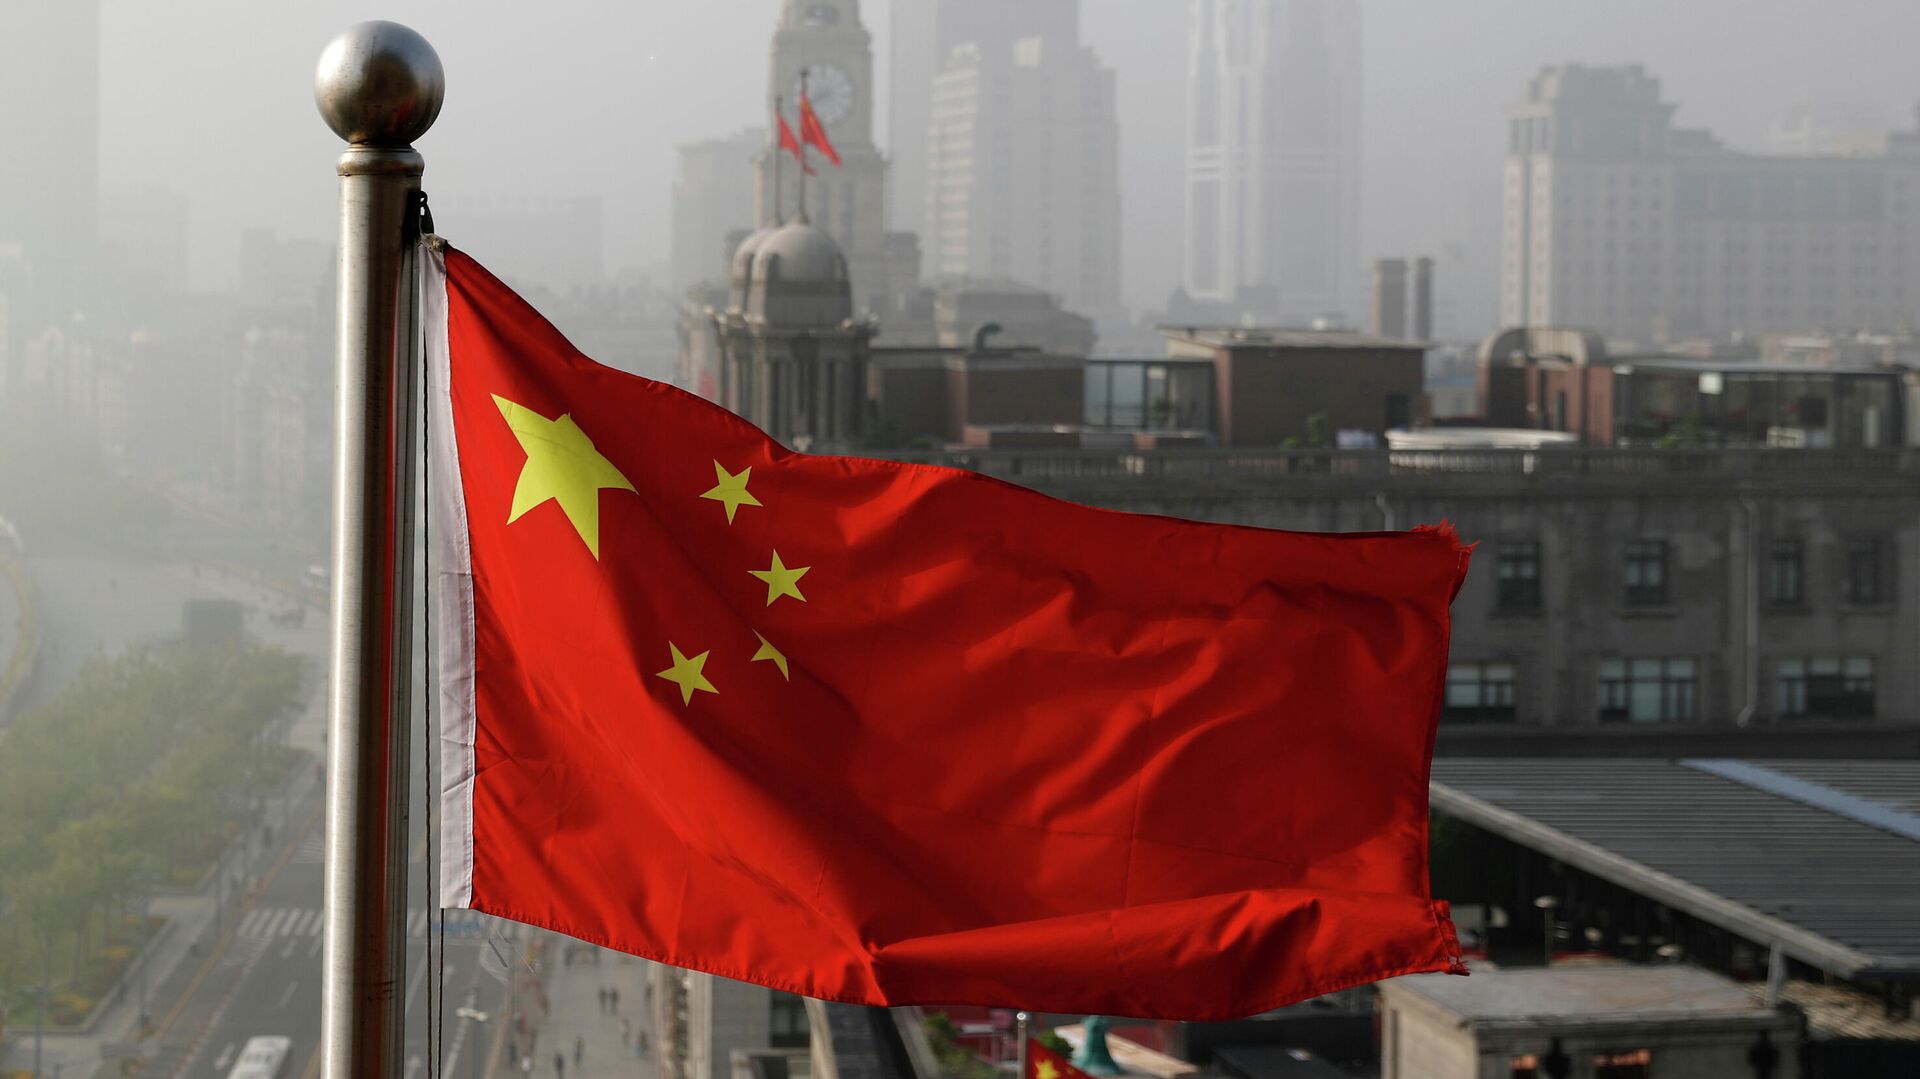 In this April 14, 2016 file photo, a Chinese national flag flutters against the office buildings in Shanghai, China.  - Sputnik International, 1920, 25.05.2022